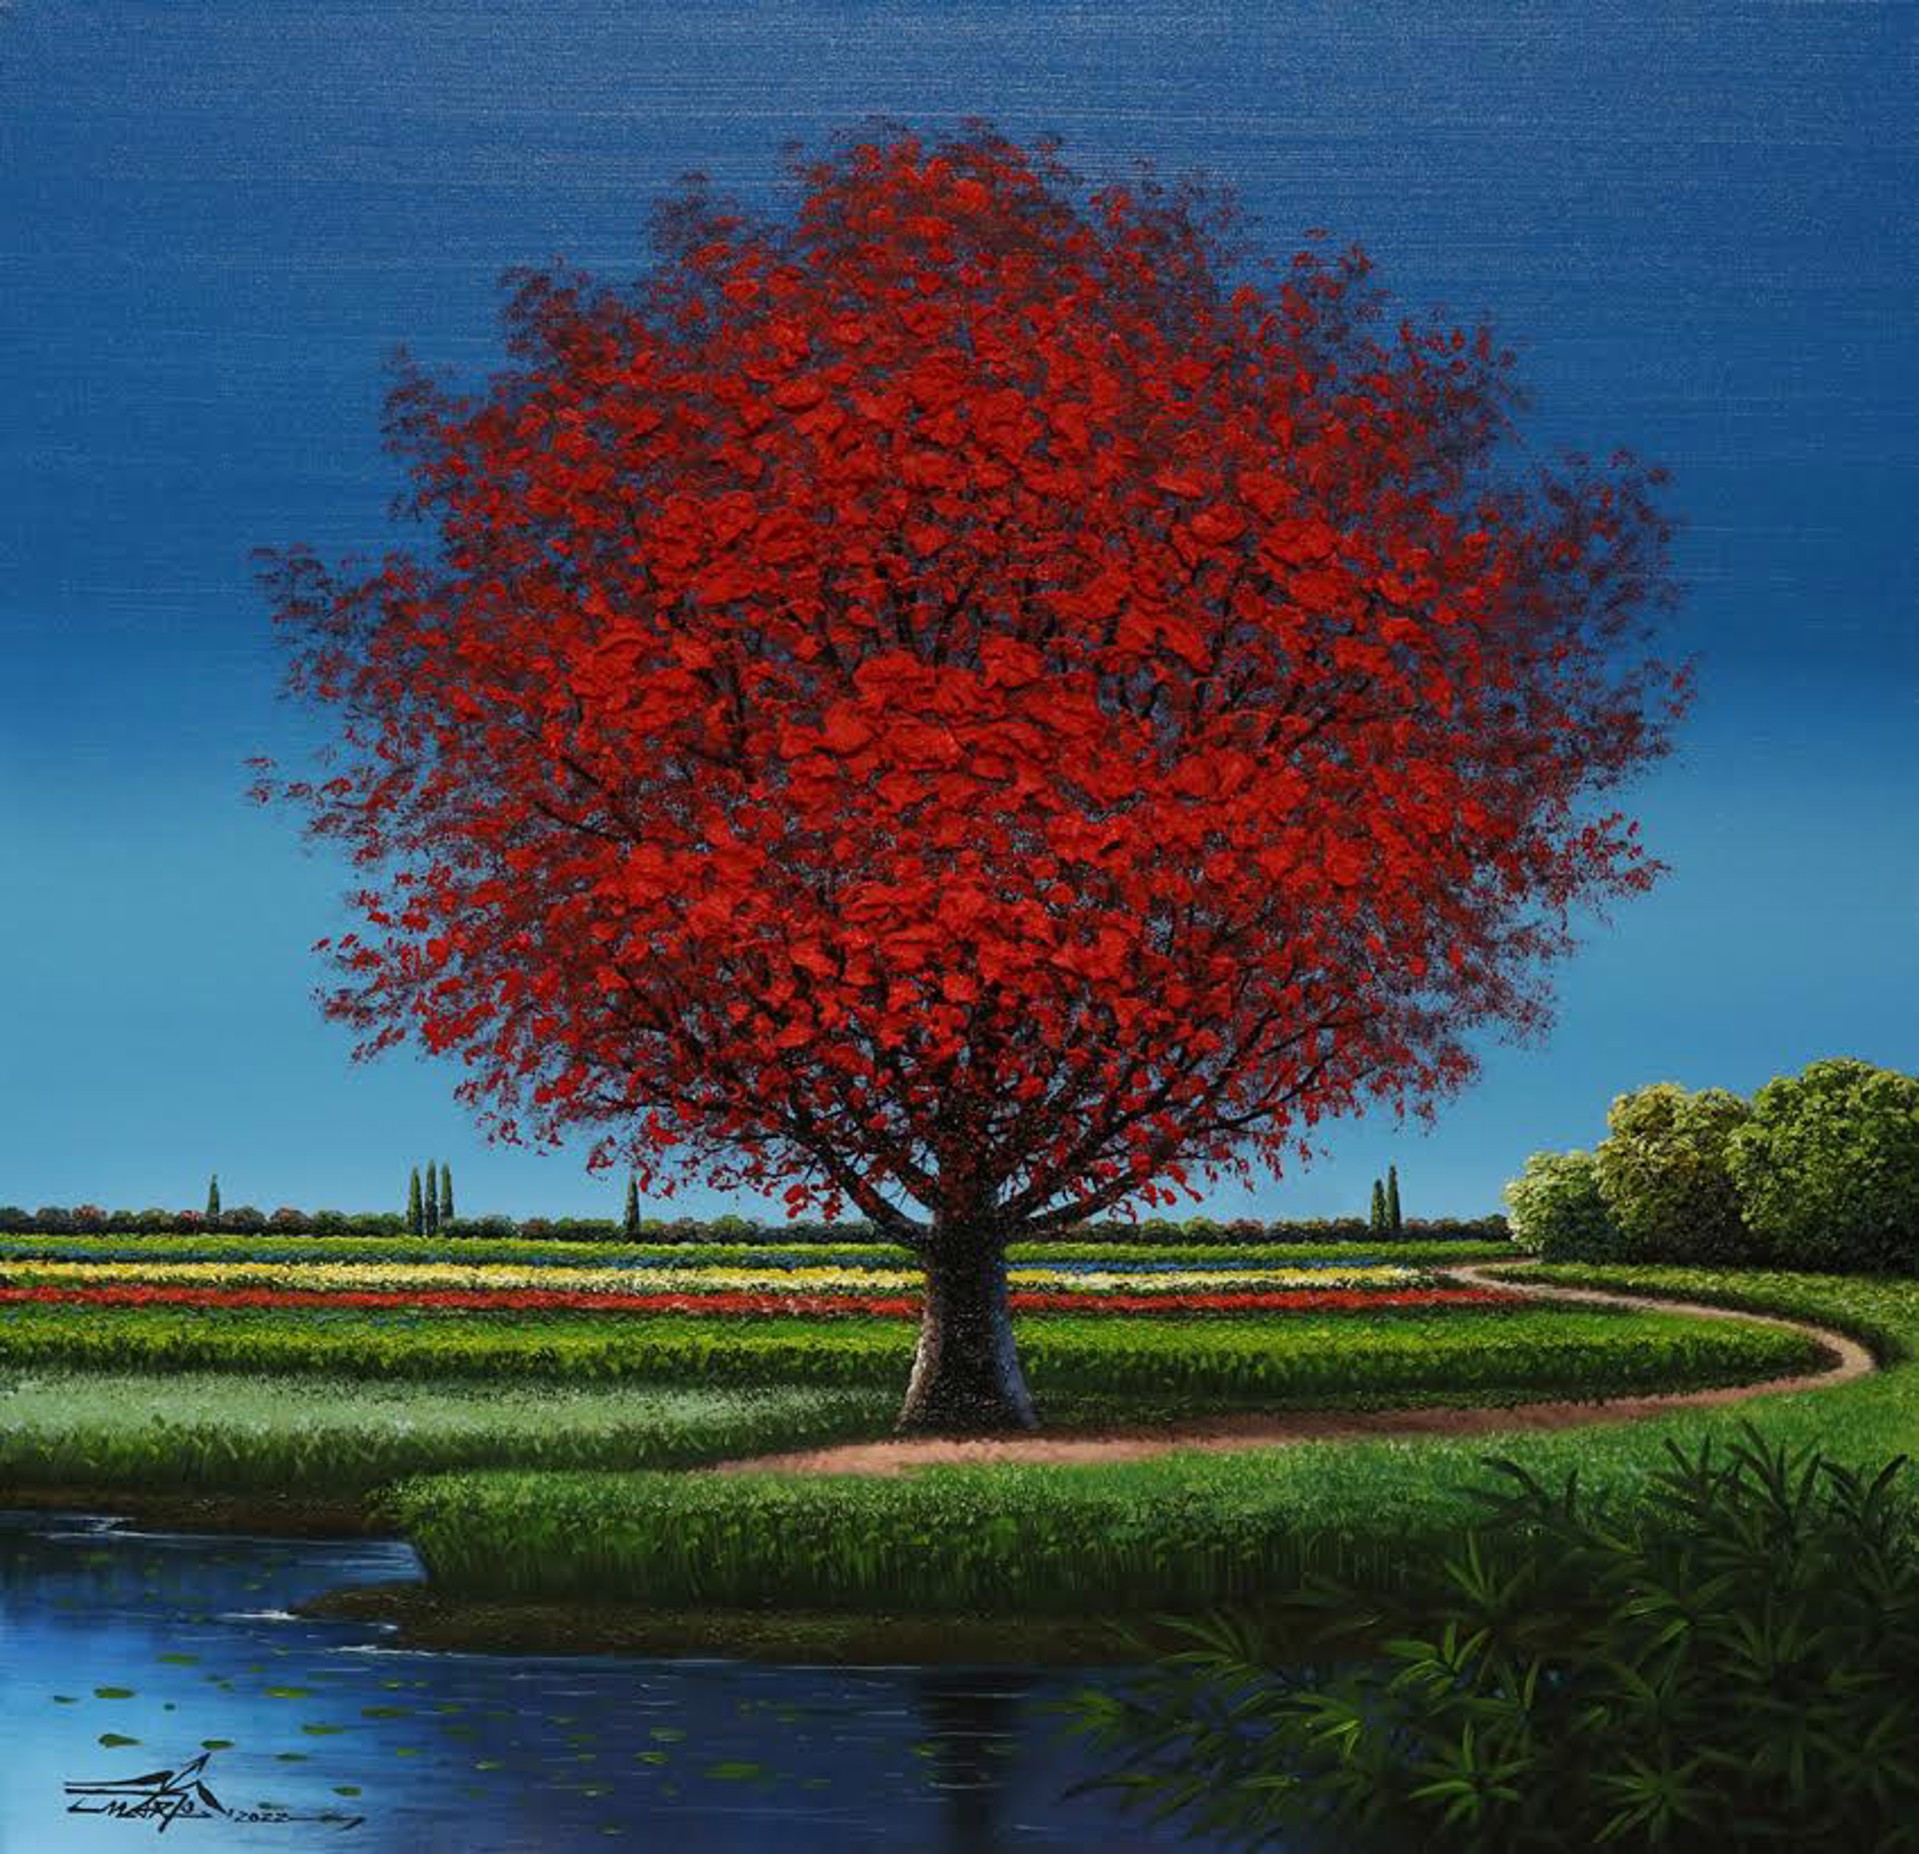 Creekside Retreat by painter artist Mario Jung features a thickly textured red leaved tree by a calm lake in front of a serene country side